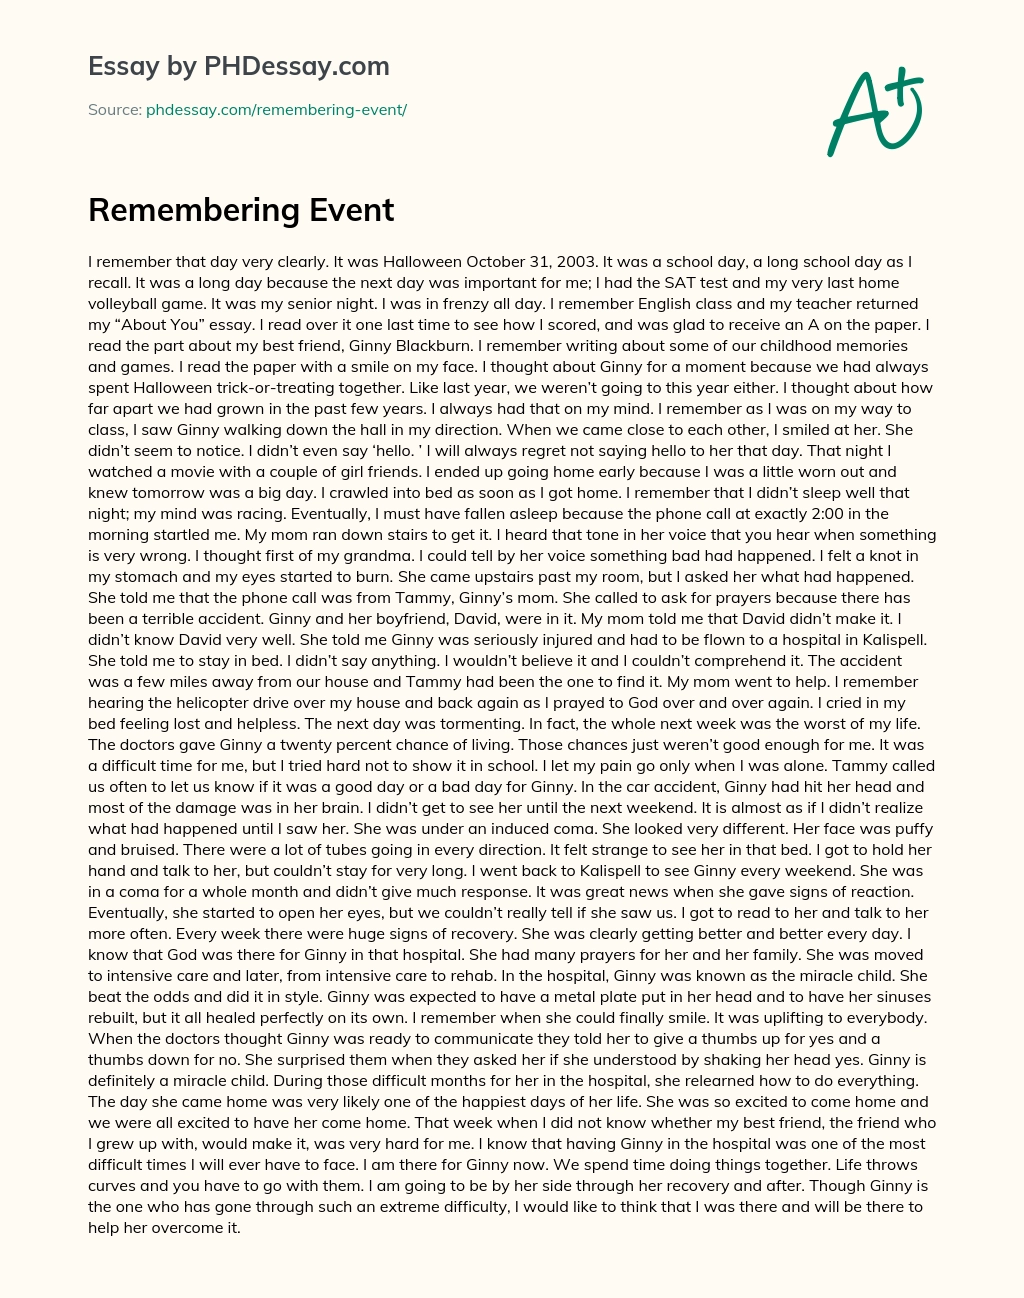 Remembering Event essay